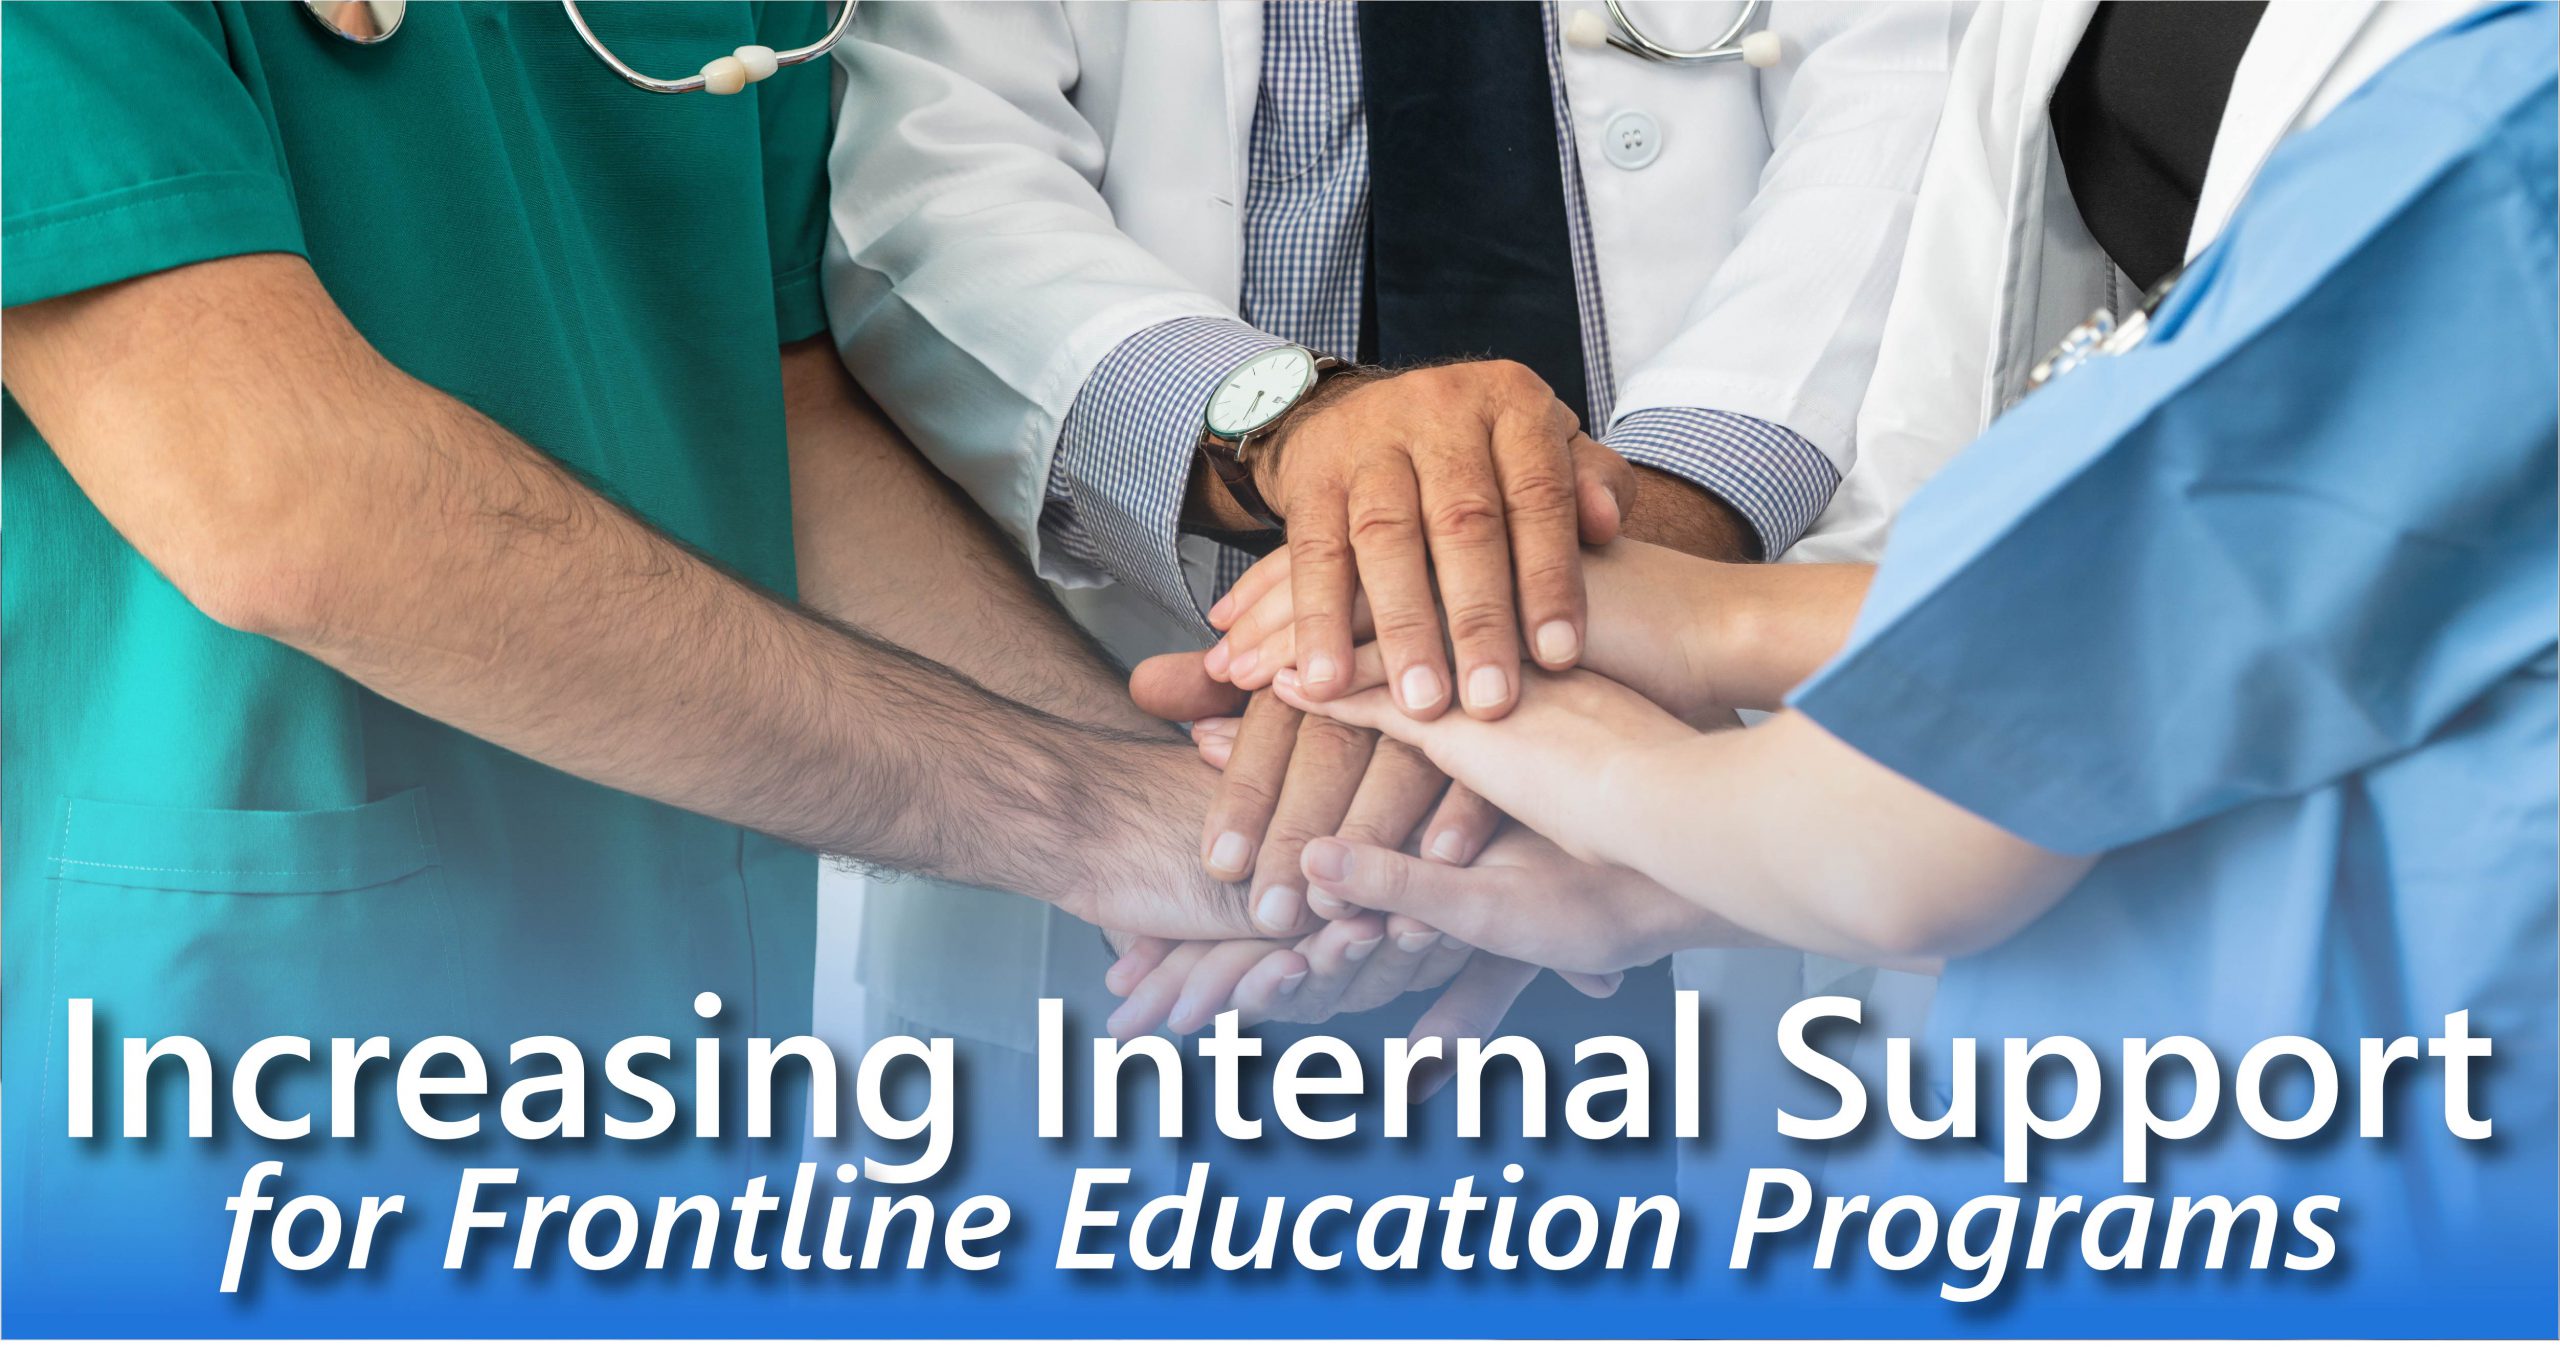 Increasing Internal Support for Frontline Education Programs